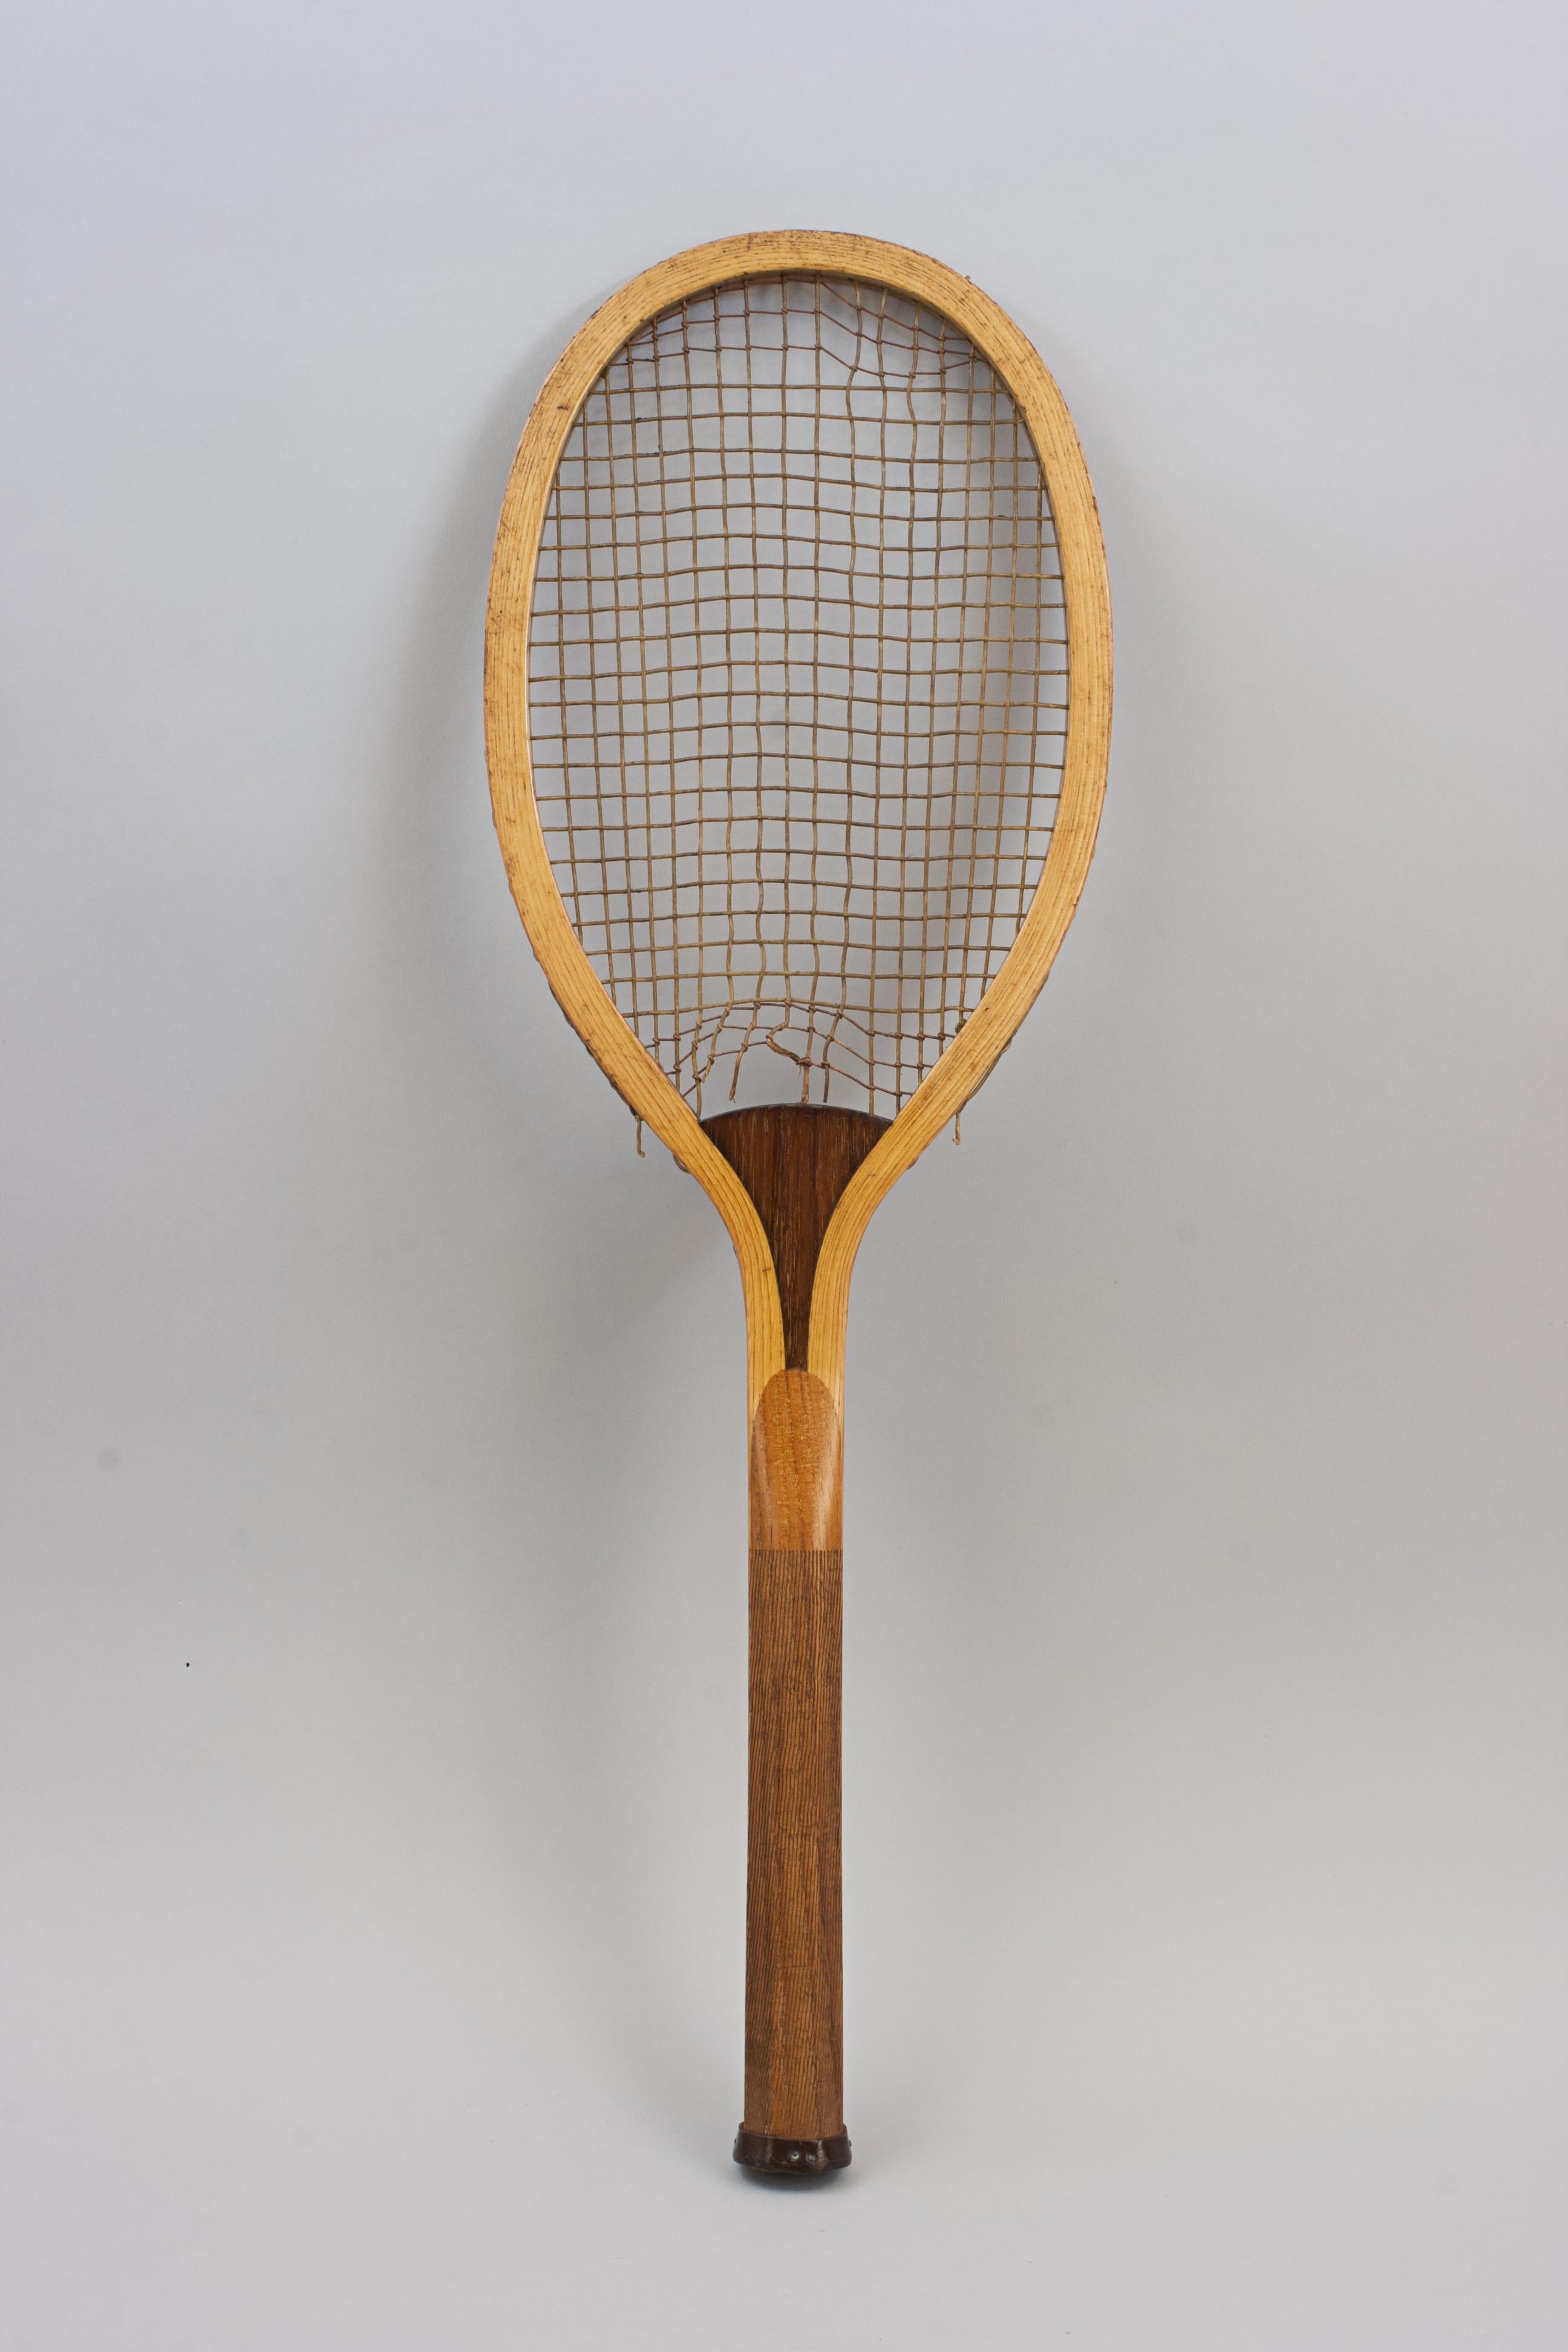 Wooden Lawn Tennis Racket, WONDER
A nice ash frame lawn tennis racket with unusual long and narrow shape head, with convex walnut wedge. The wedge is stamped 'Wonder'. The racket has the original gut strings, three rows of trebling to the top and